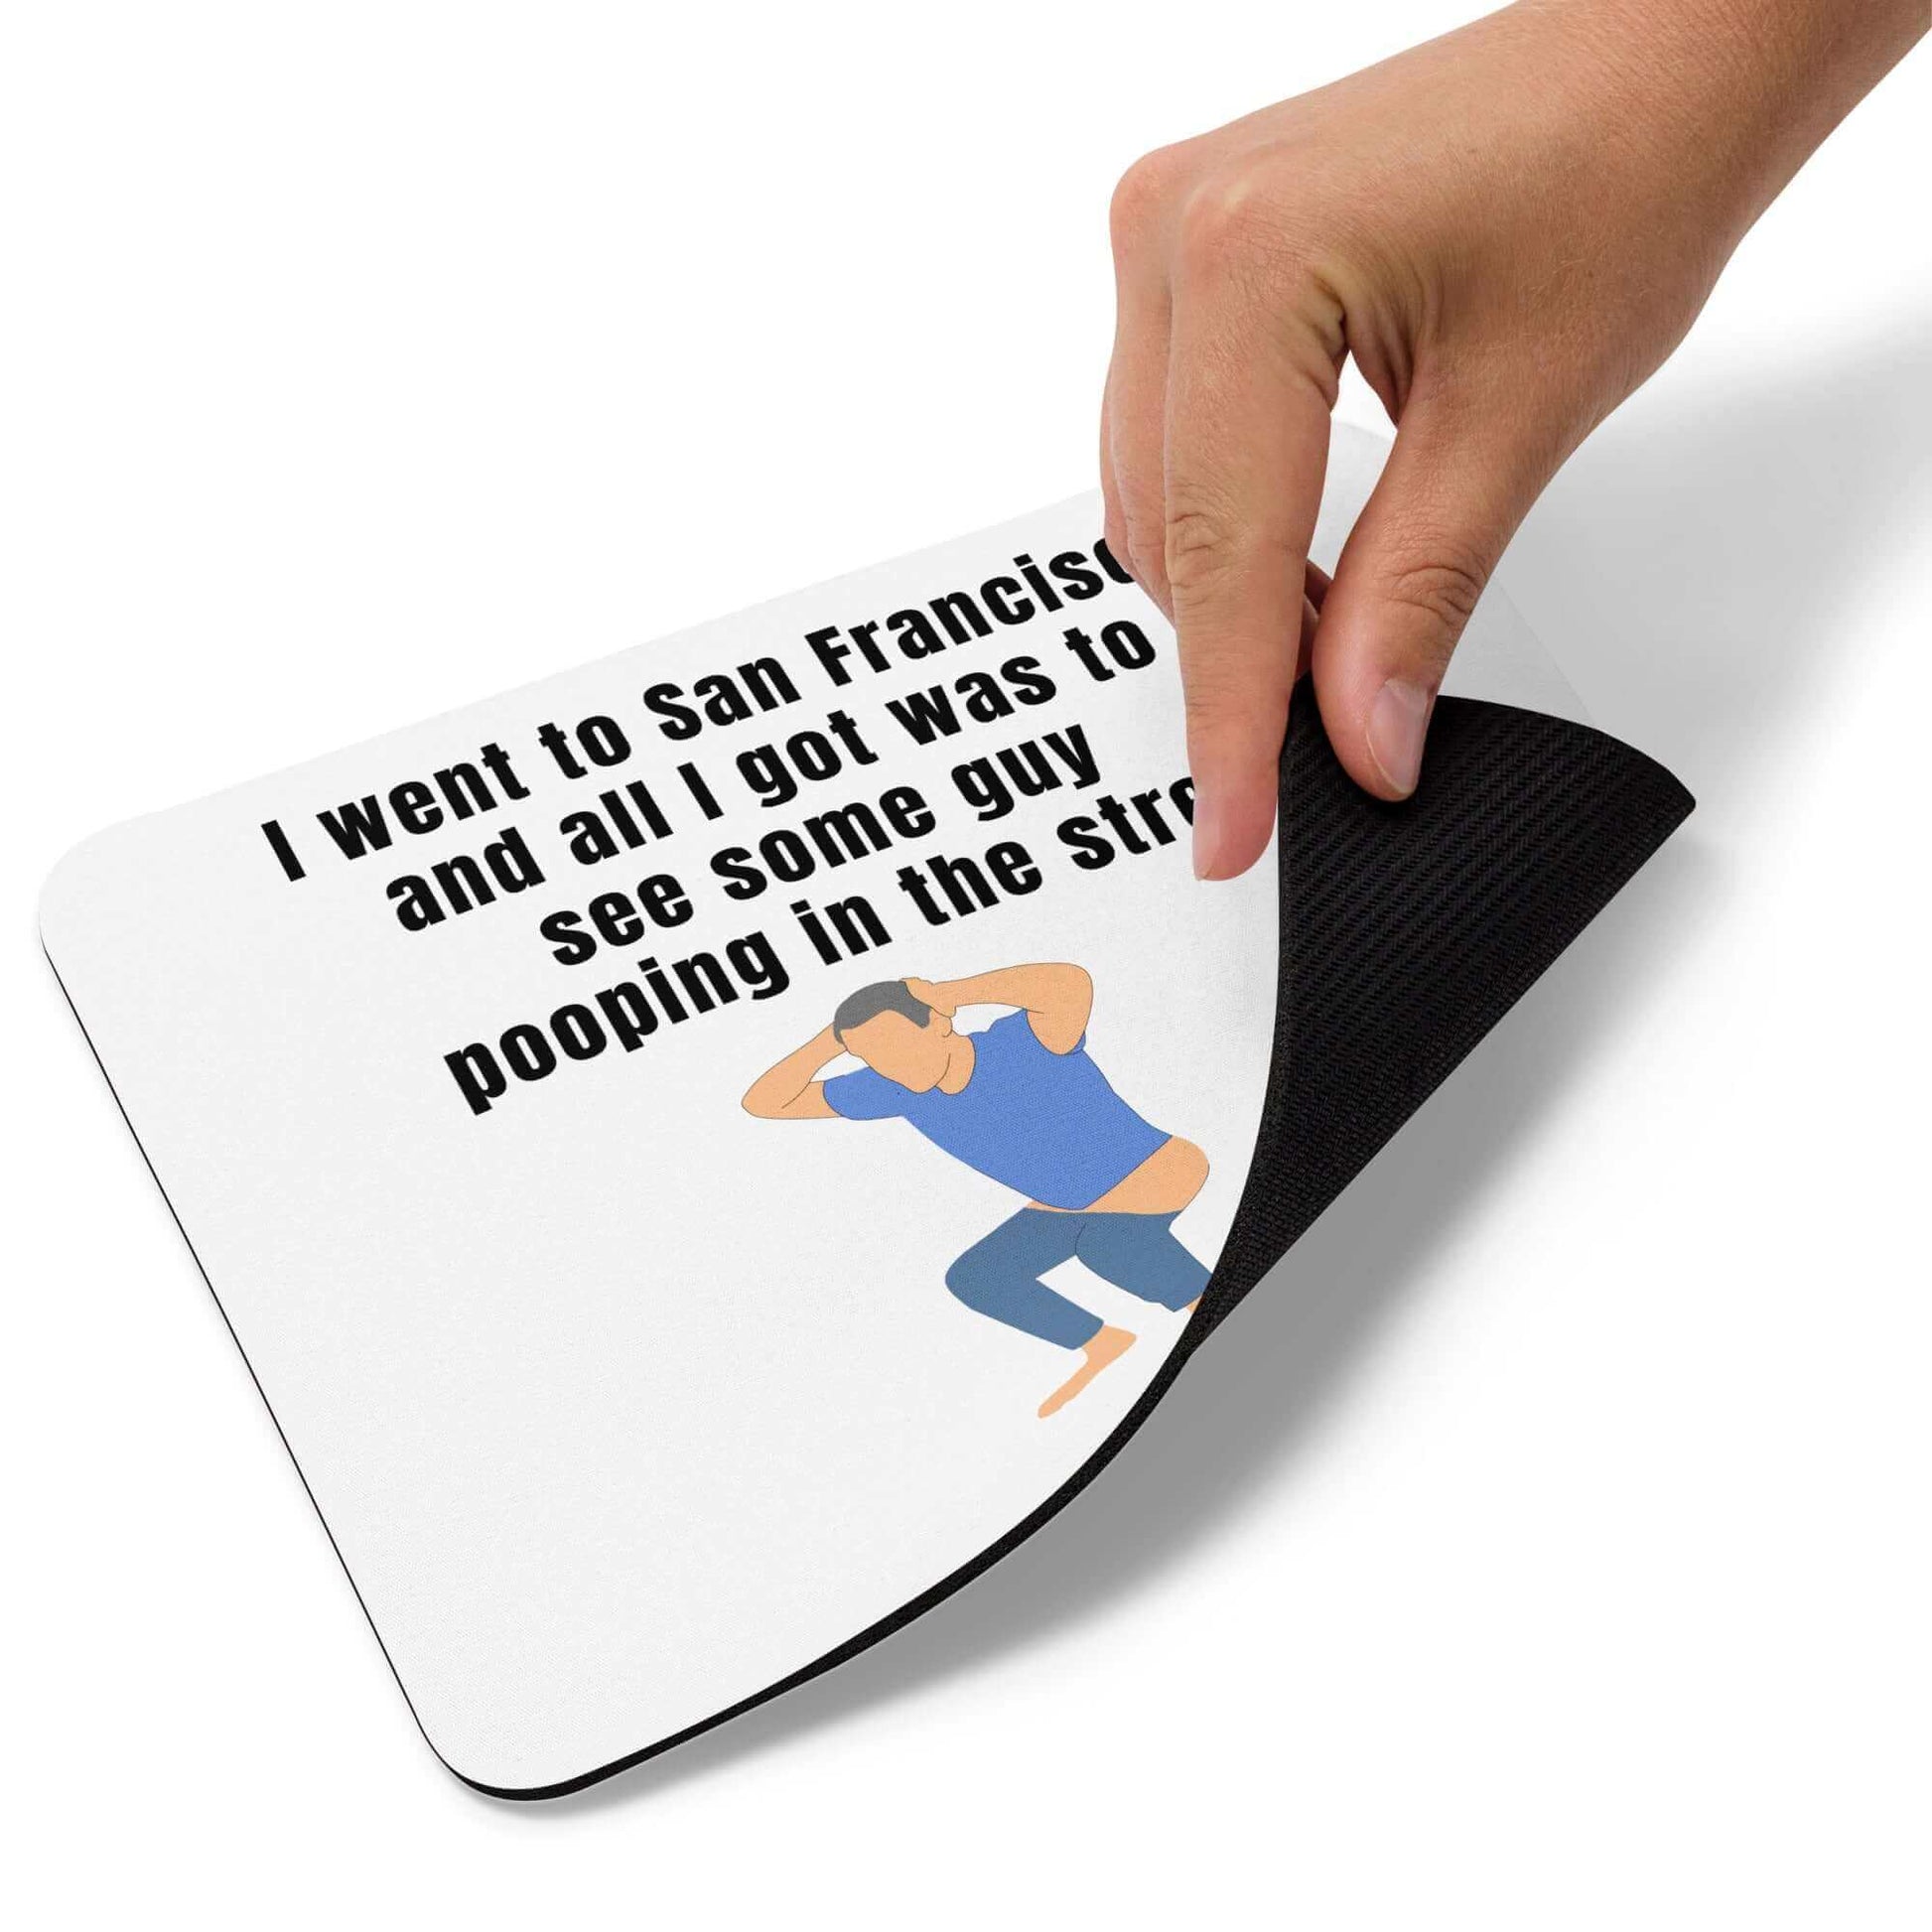 I went to San Francisco and all I got was to see some guy pooping in the street - Mouse pad - Horrible Designs